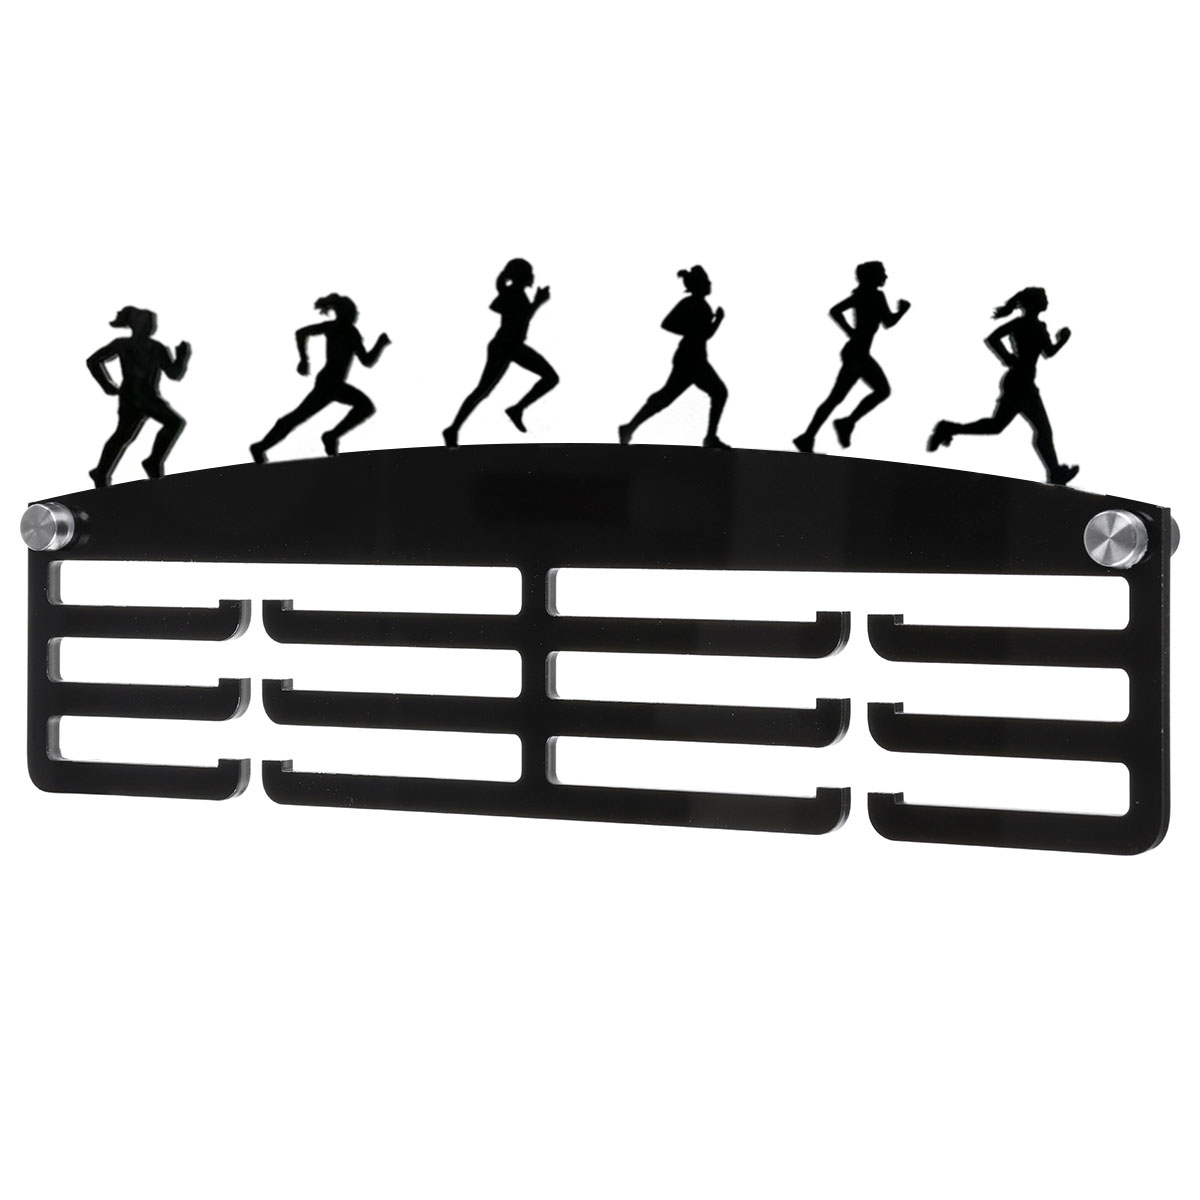 300x115x5mm-Acrylic-Personalised-3-Tier-Medal-Hanger-Holder-Rack-1667984